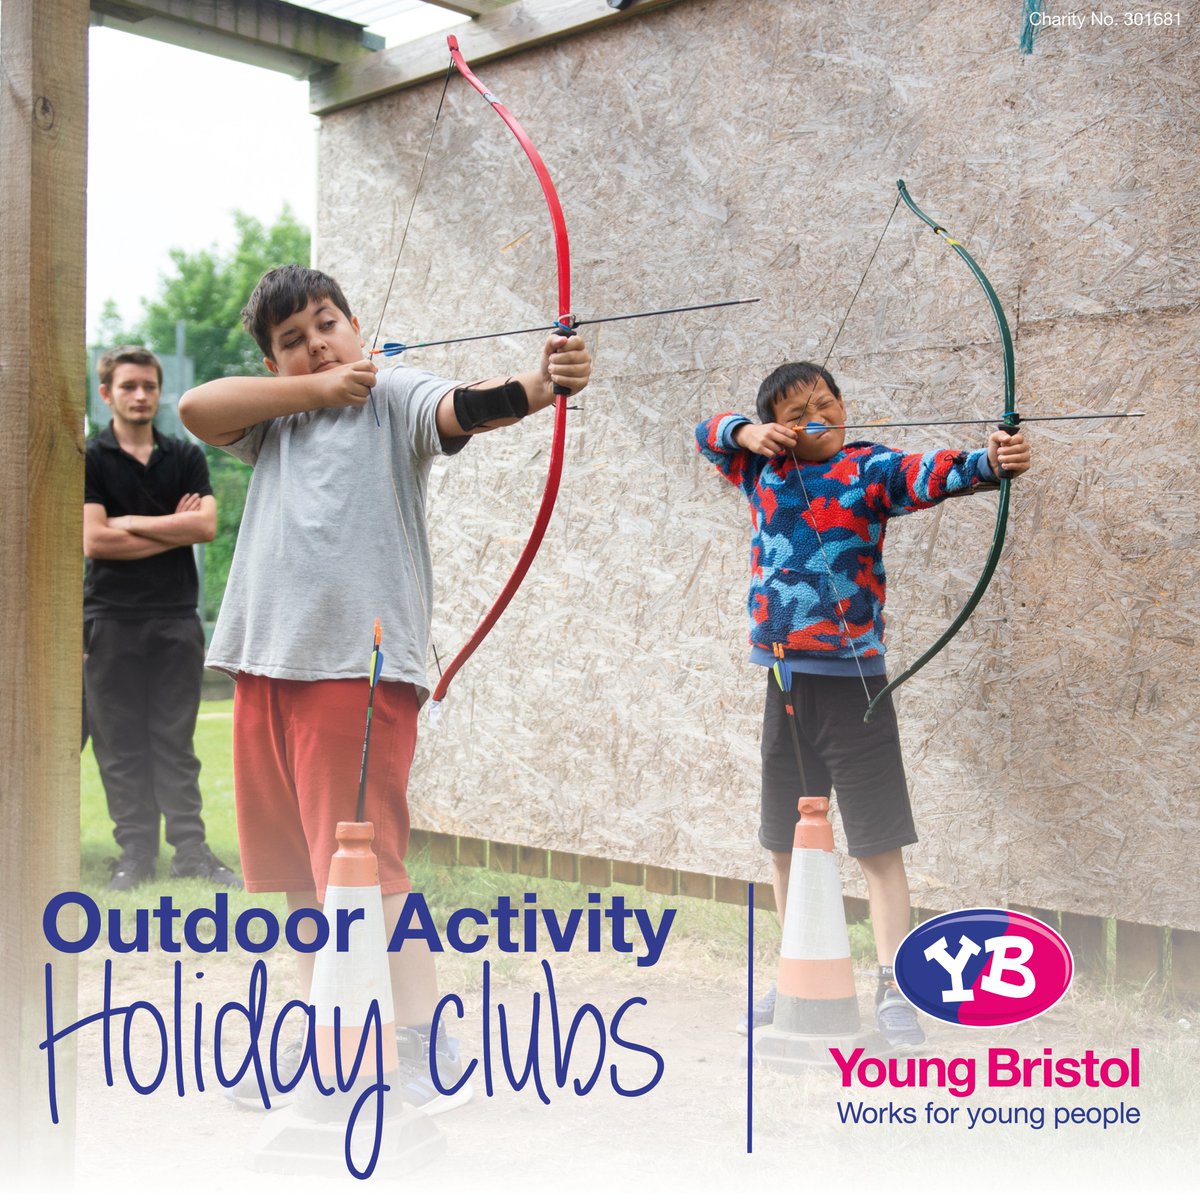 February Half Term Outdoor Activities! Take part in YB’s Outdoor Activities this February Half Term and get stuck in with a variety of activities: 🎯Archery and Bushcraft ⛰️Orienteering 💧Stream walking and caving Book now to secure your place! ⬇️ tinyurl.com/2wtsn35d